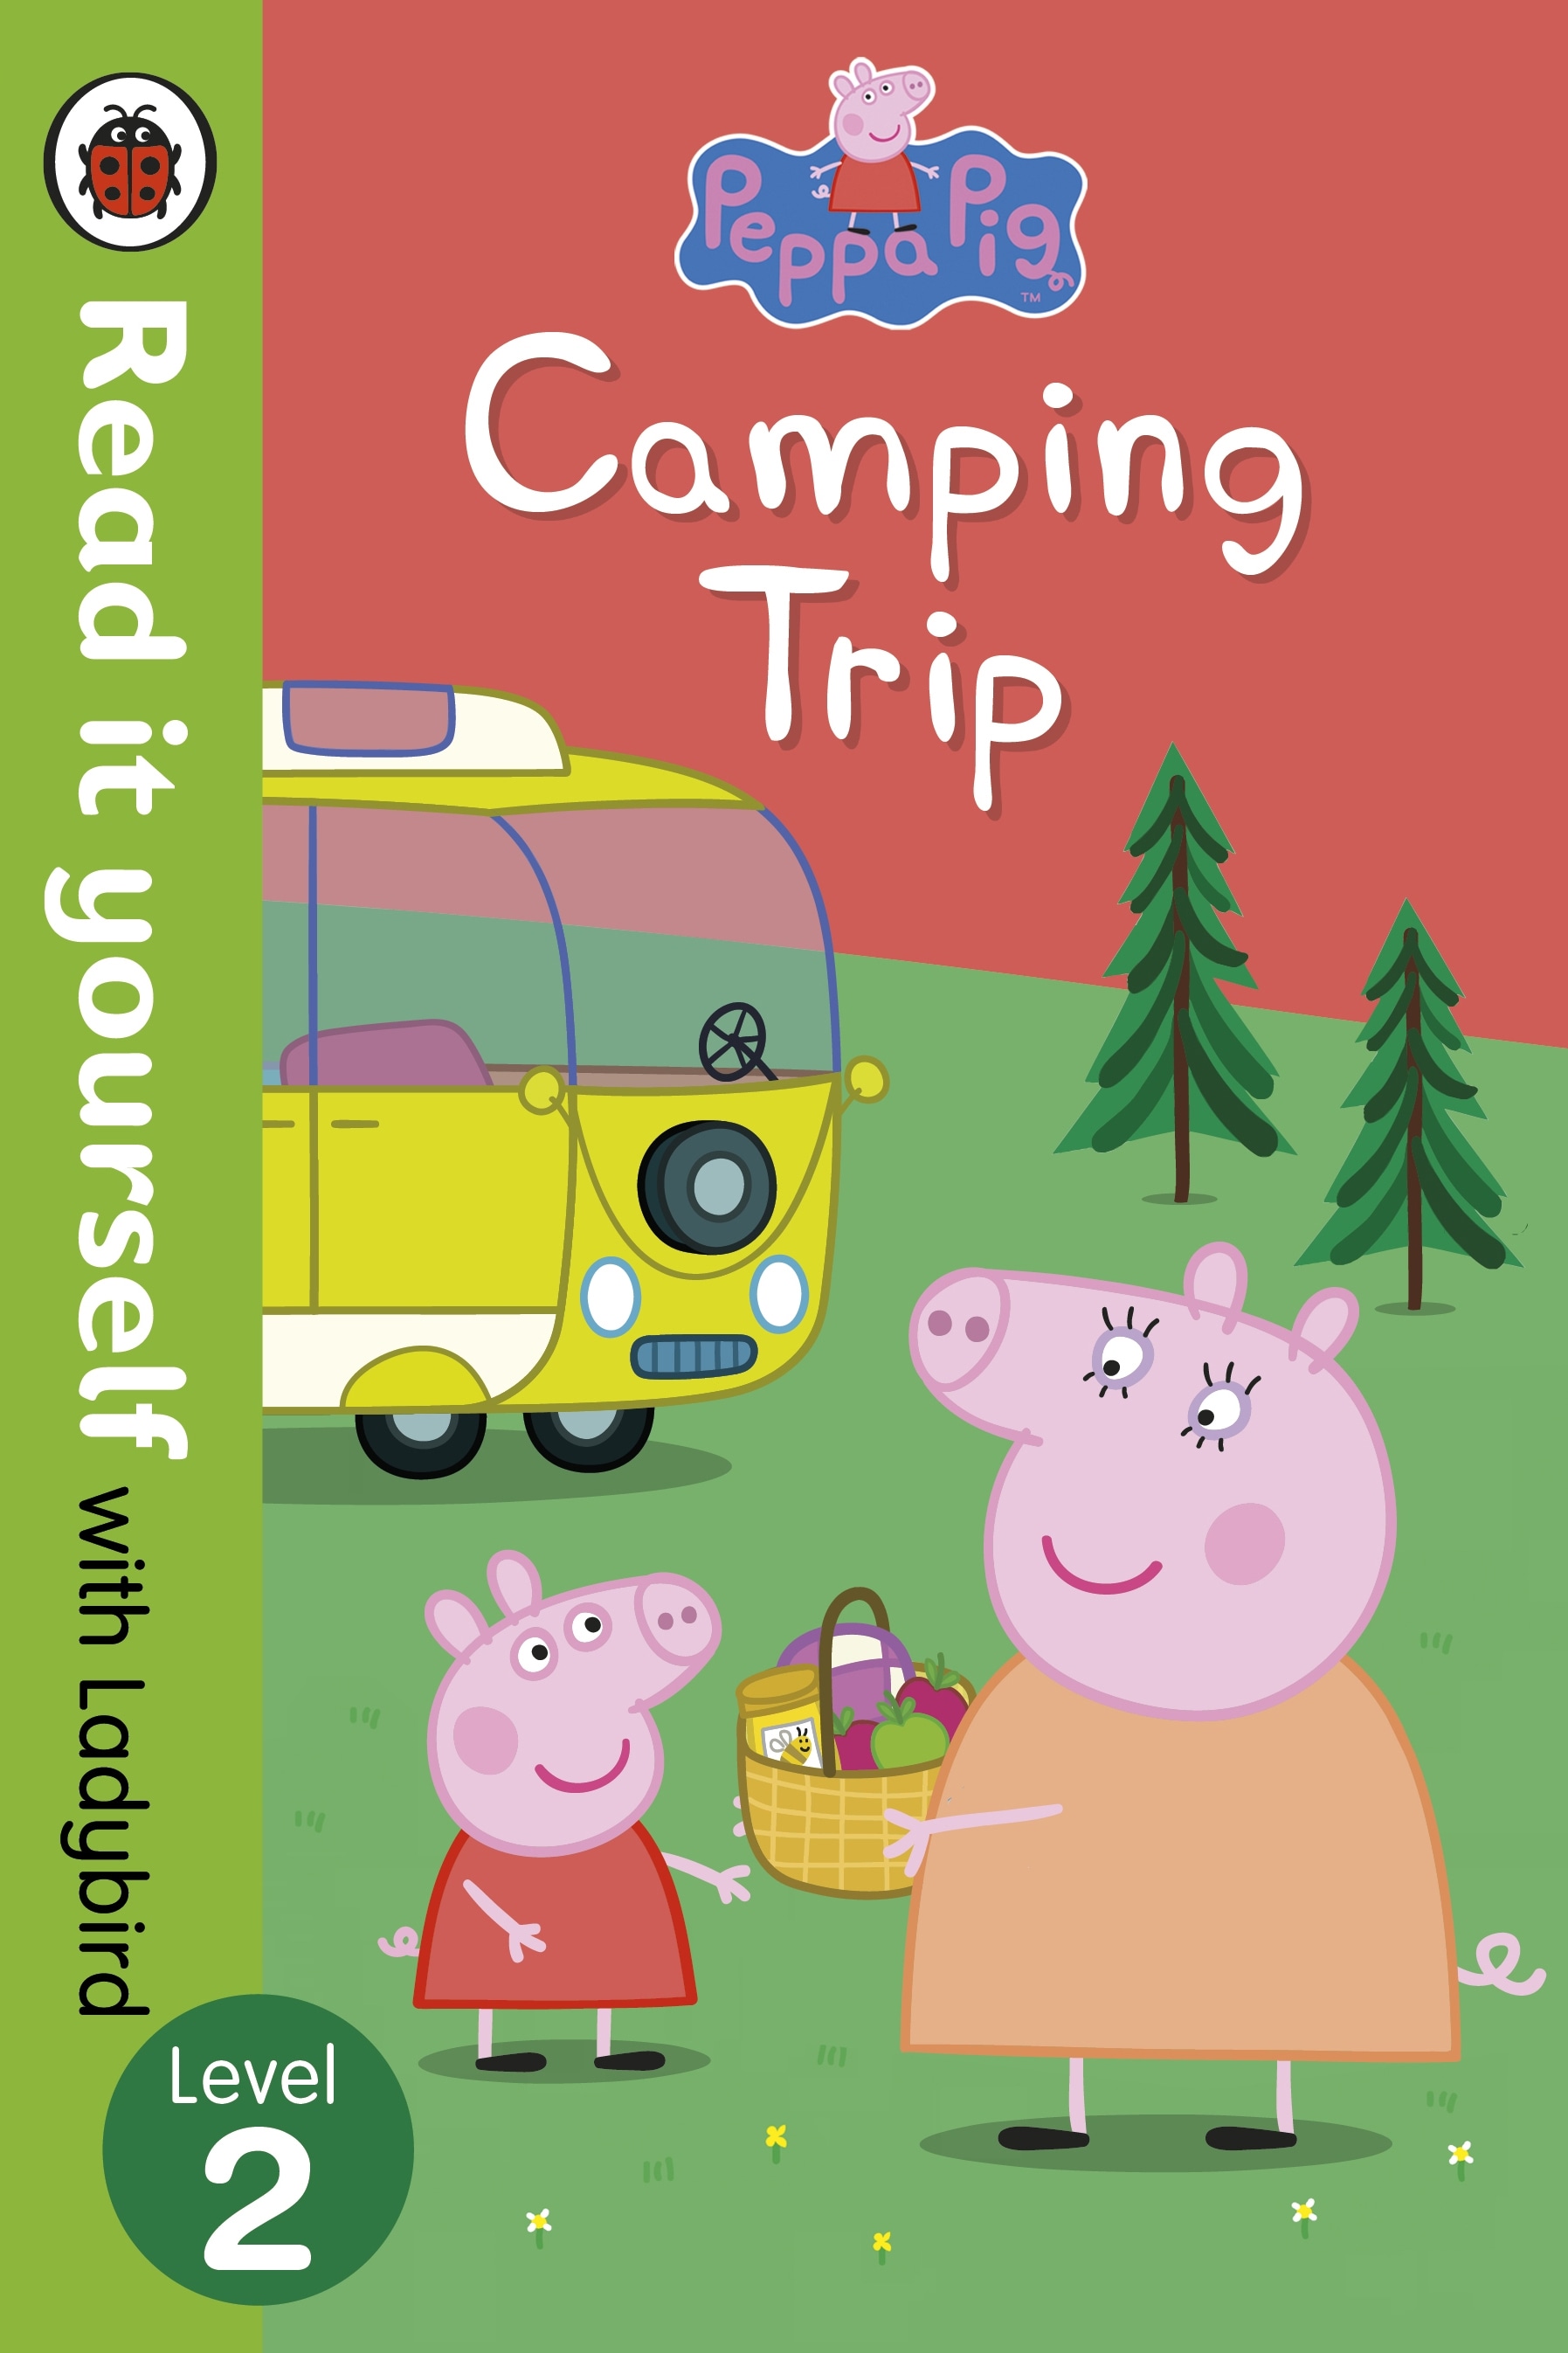 Book “Peppa Pig: Camping Trip - Read it yourself with Ladybird” by Ladybird, Peppa Pig — July 2, 2015